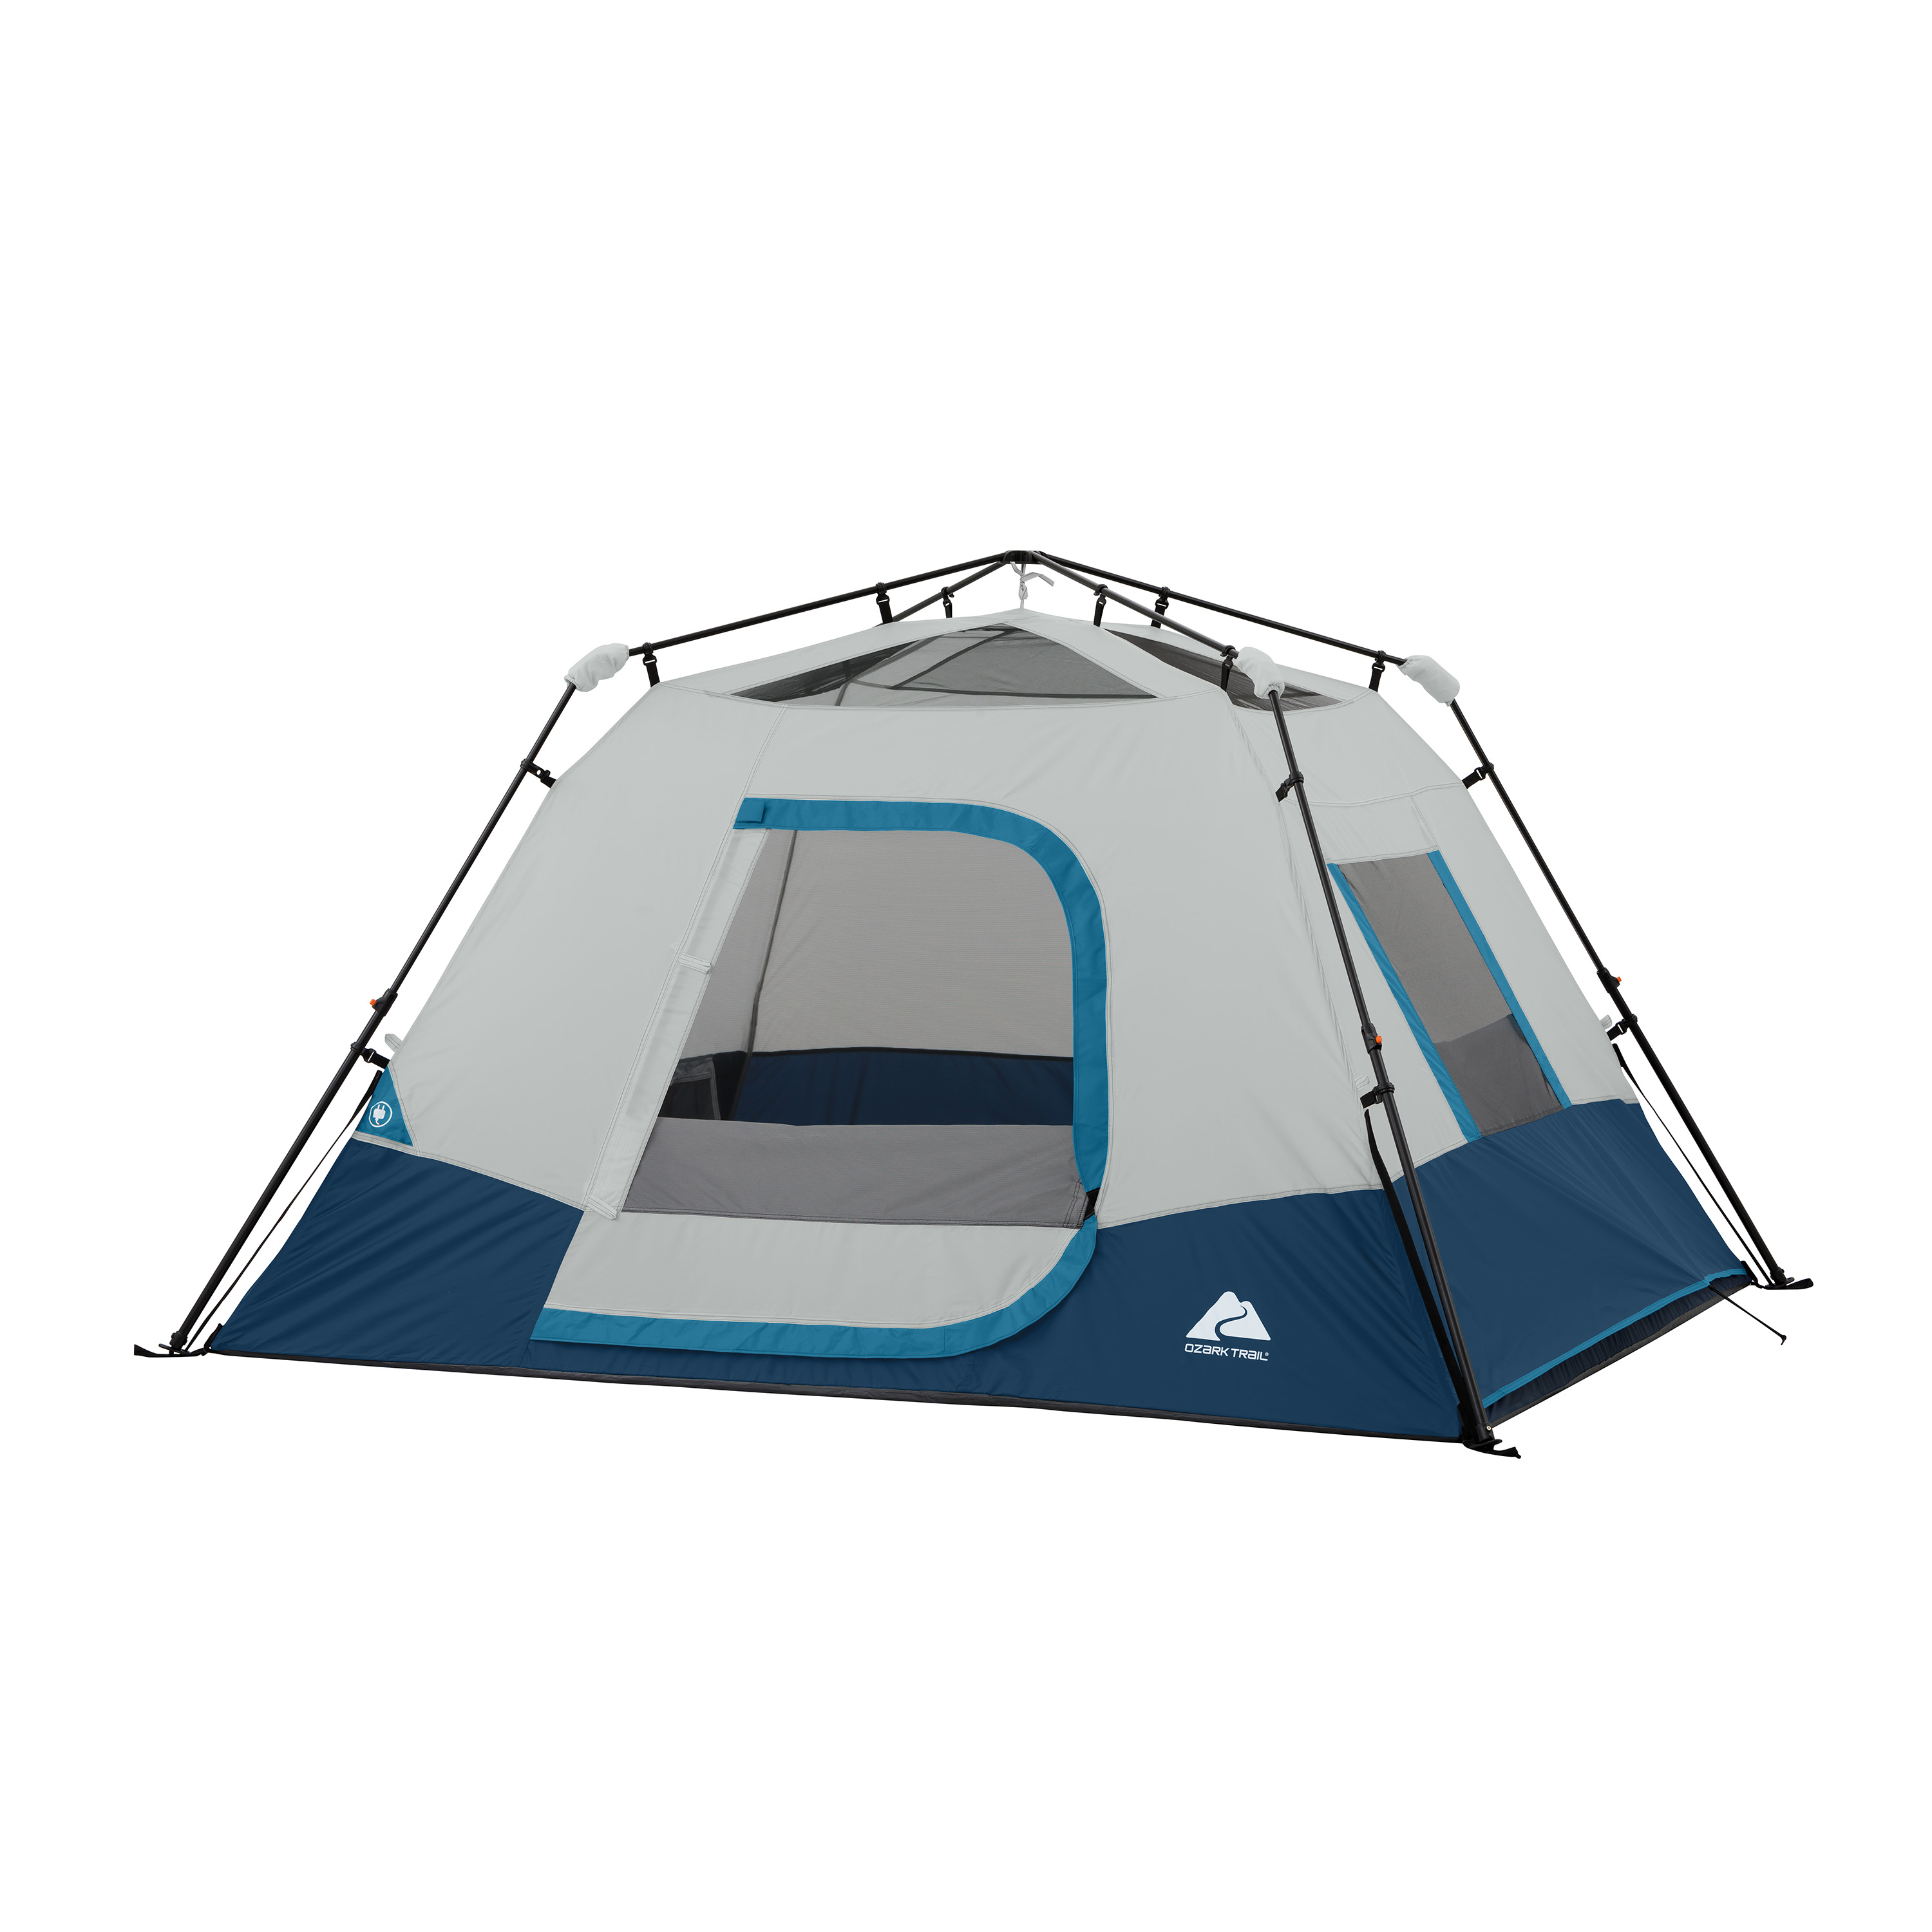 Ozark Trail 4 Piece, Tent, Chair and Table Camping Combo - image 3 of 15